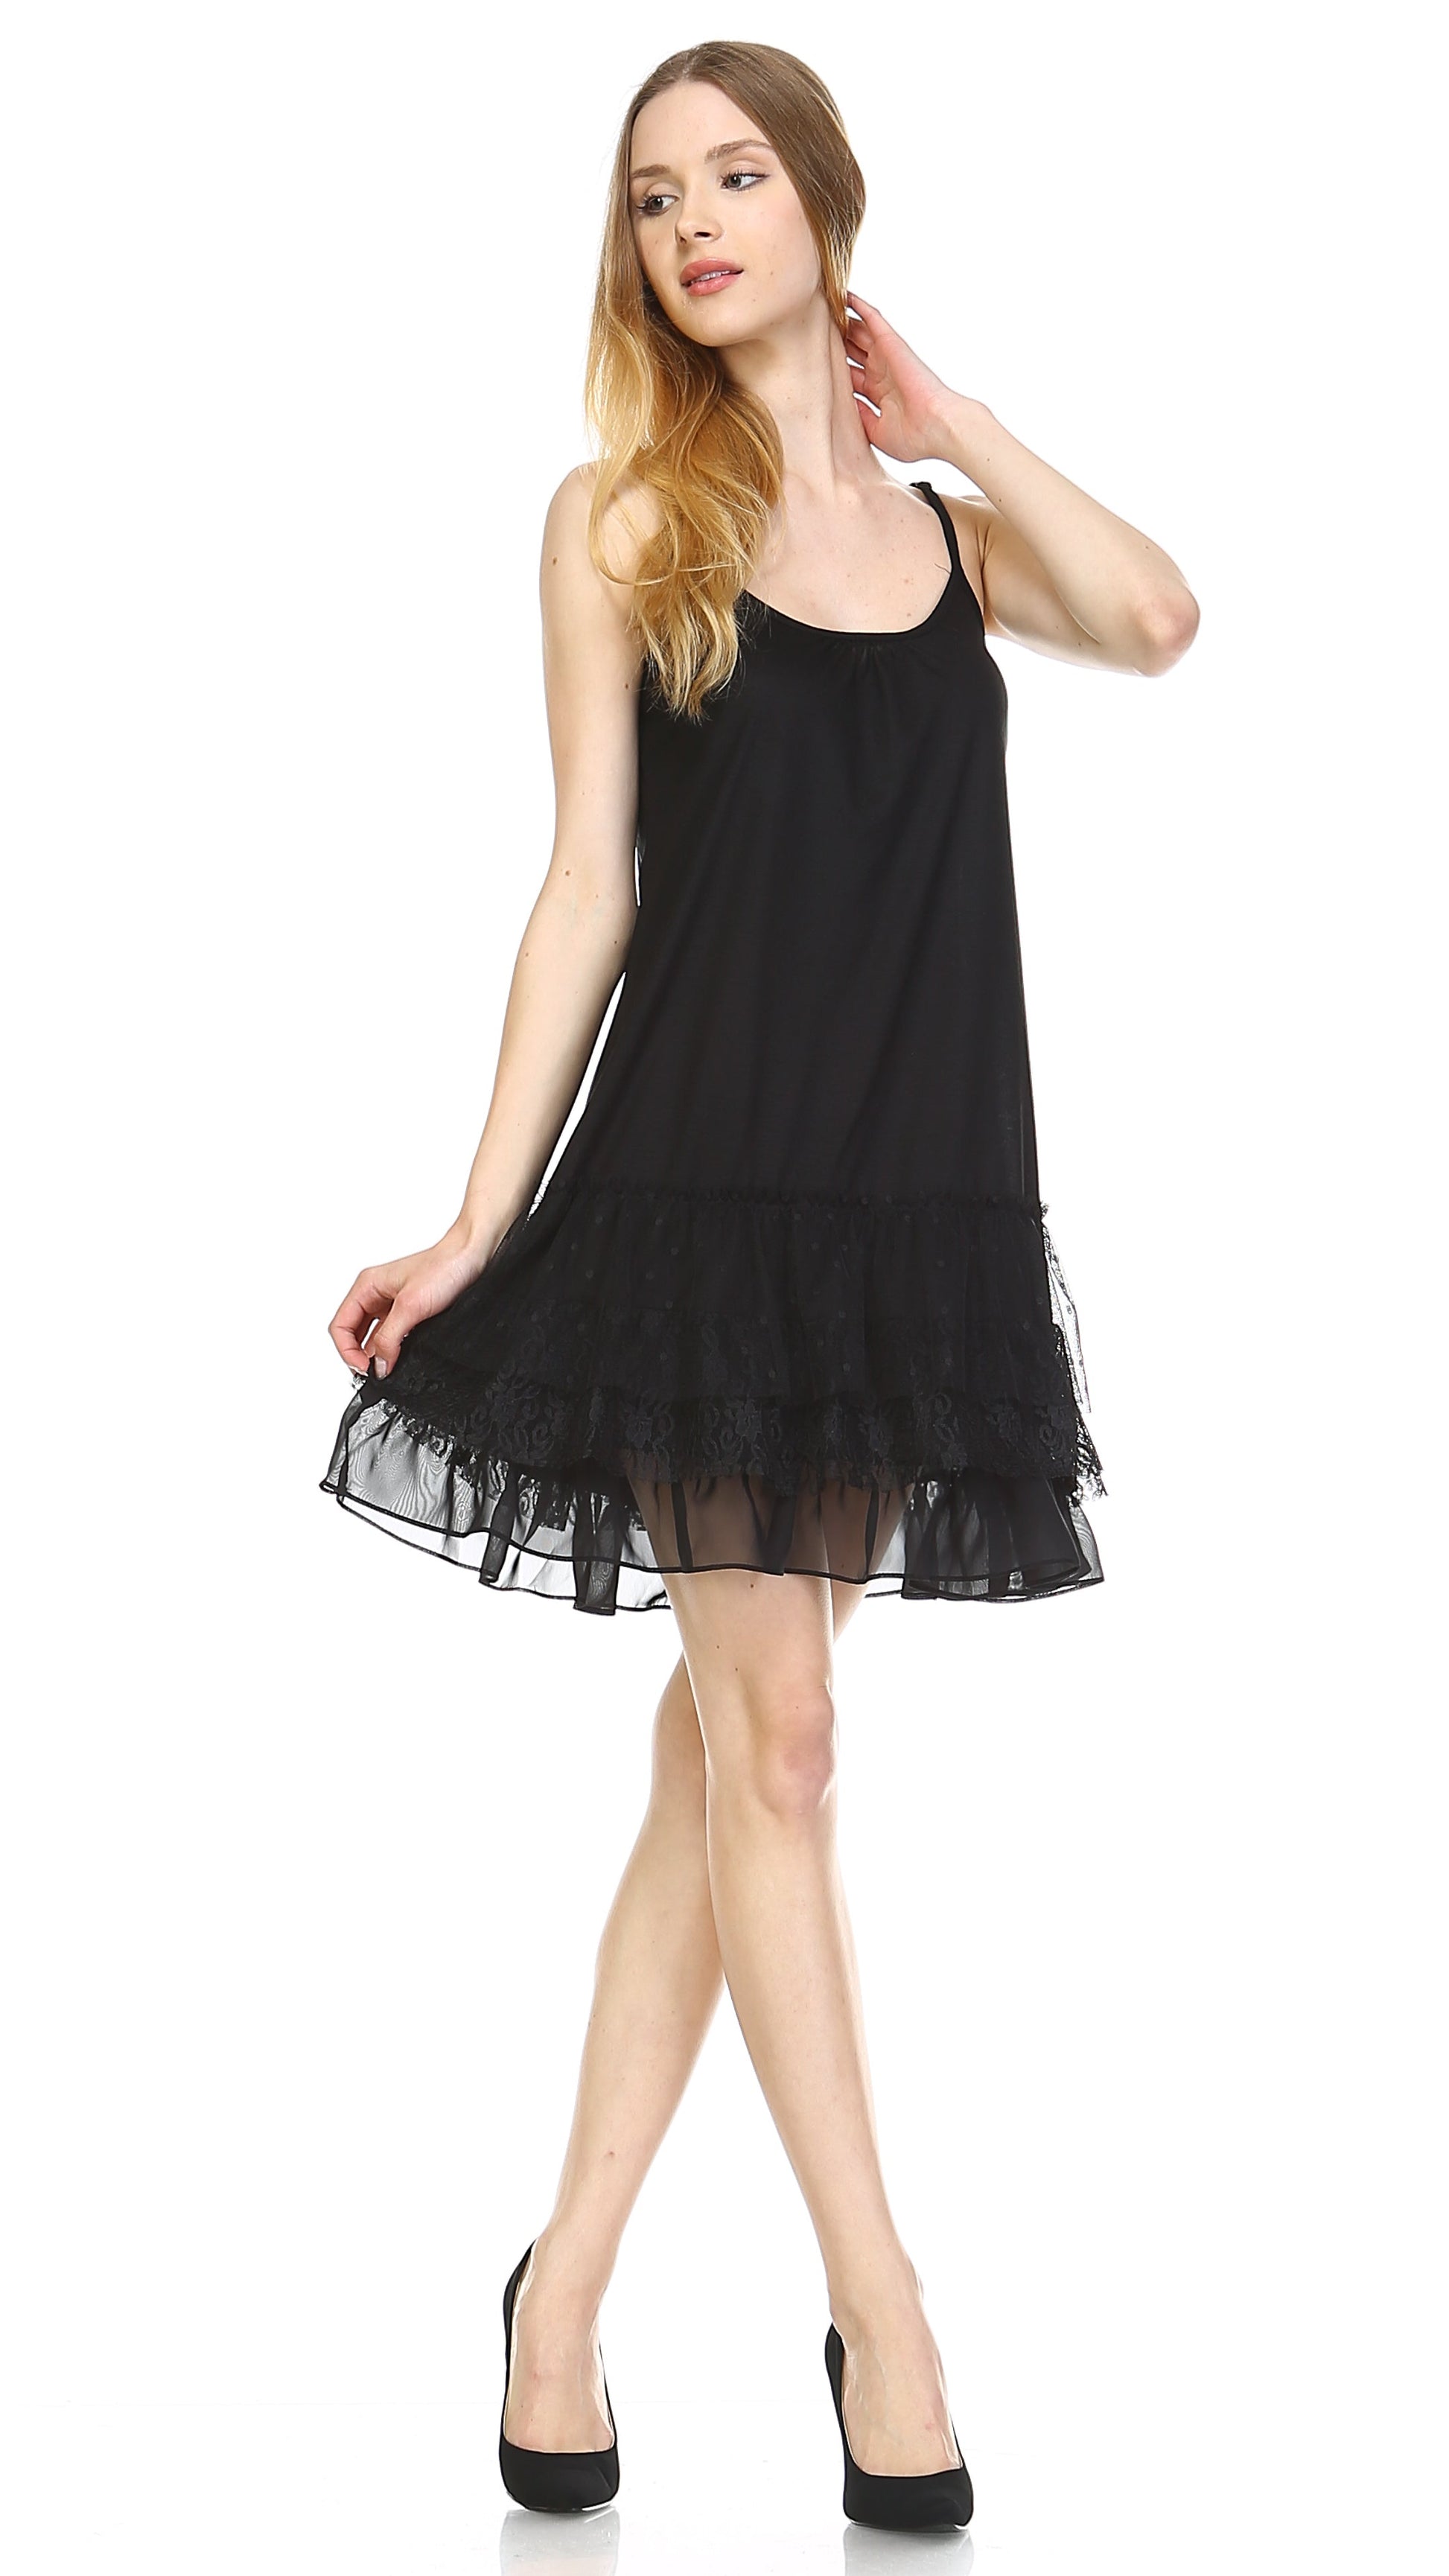 Women's Knit Flare Full Slip with 3 combo ruffle layers - Shop Lev